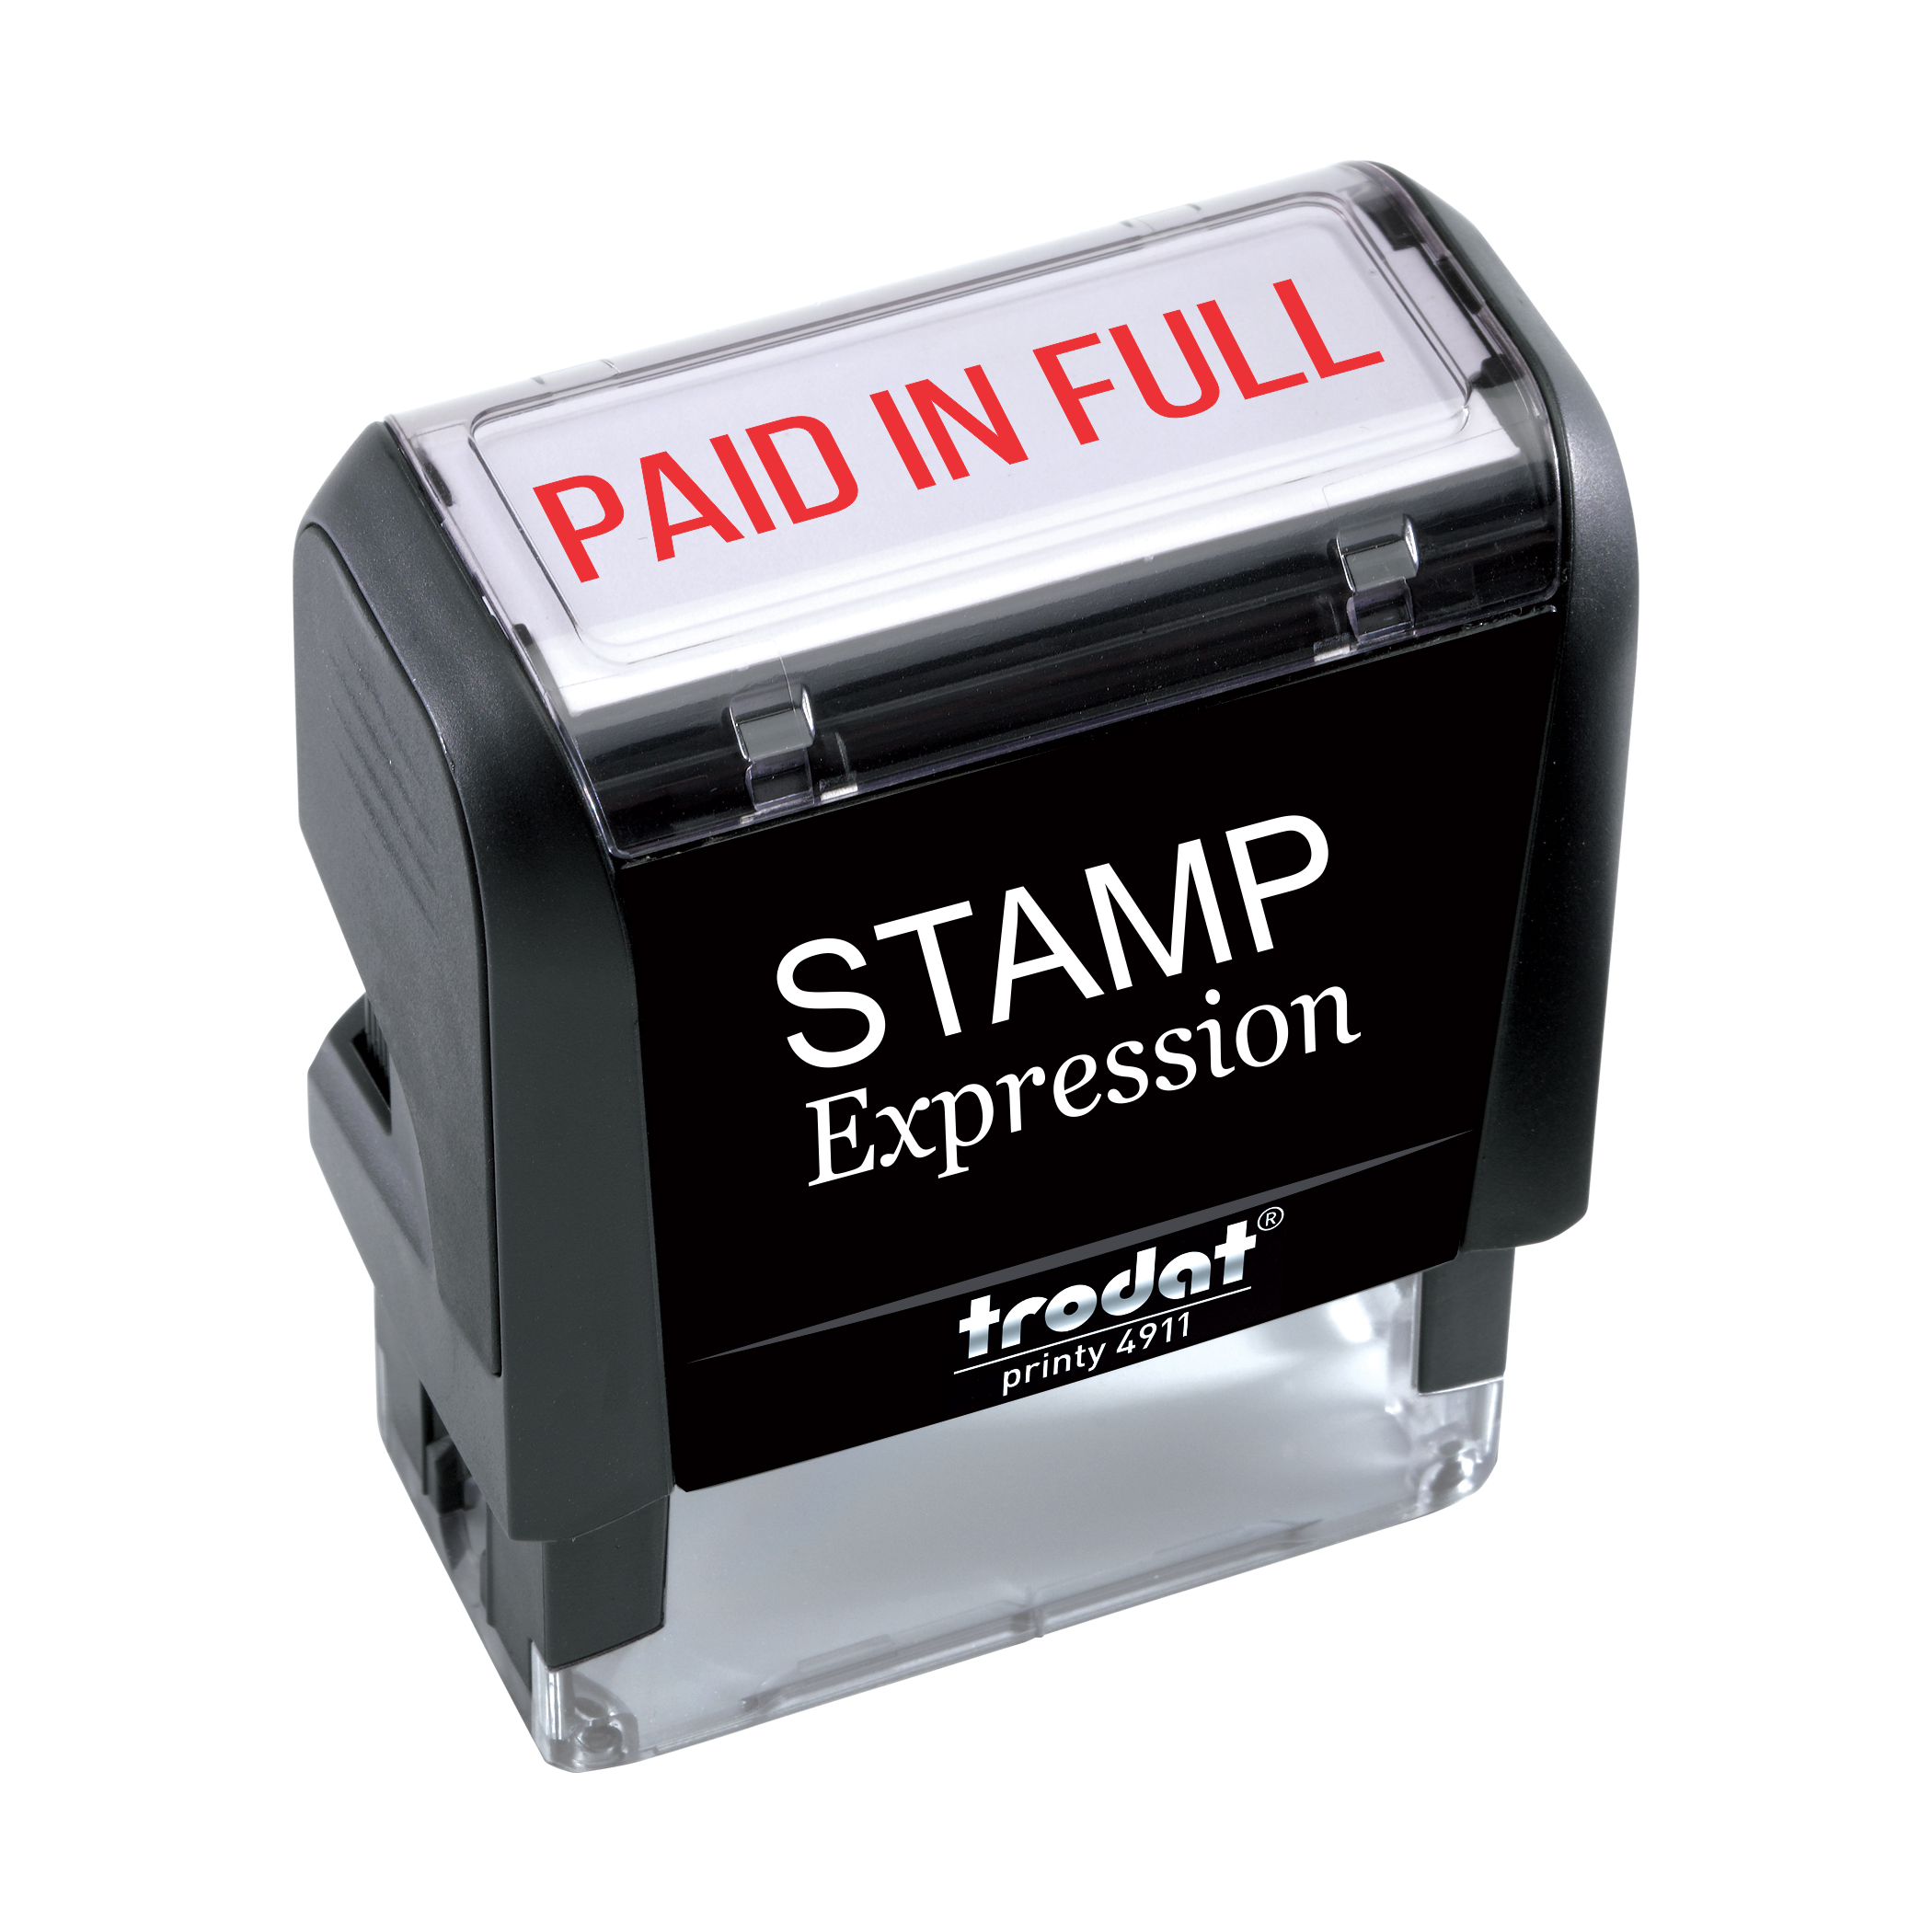 Paid In Full Office Self Inking Rubber Stamp